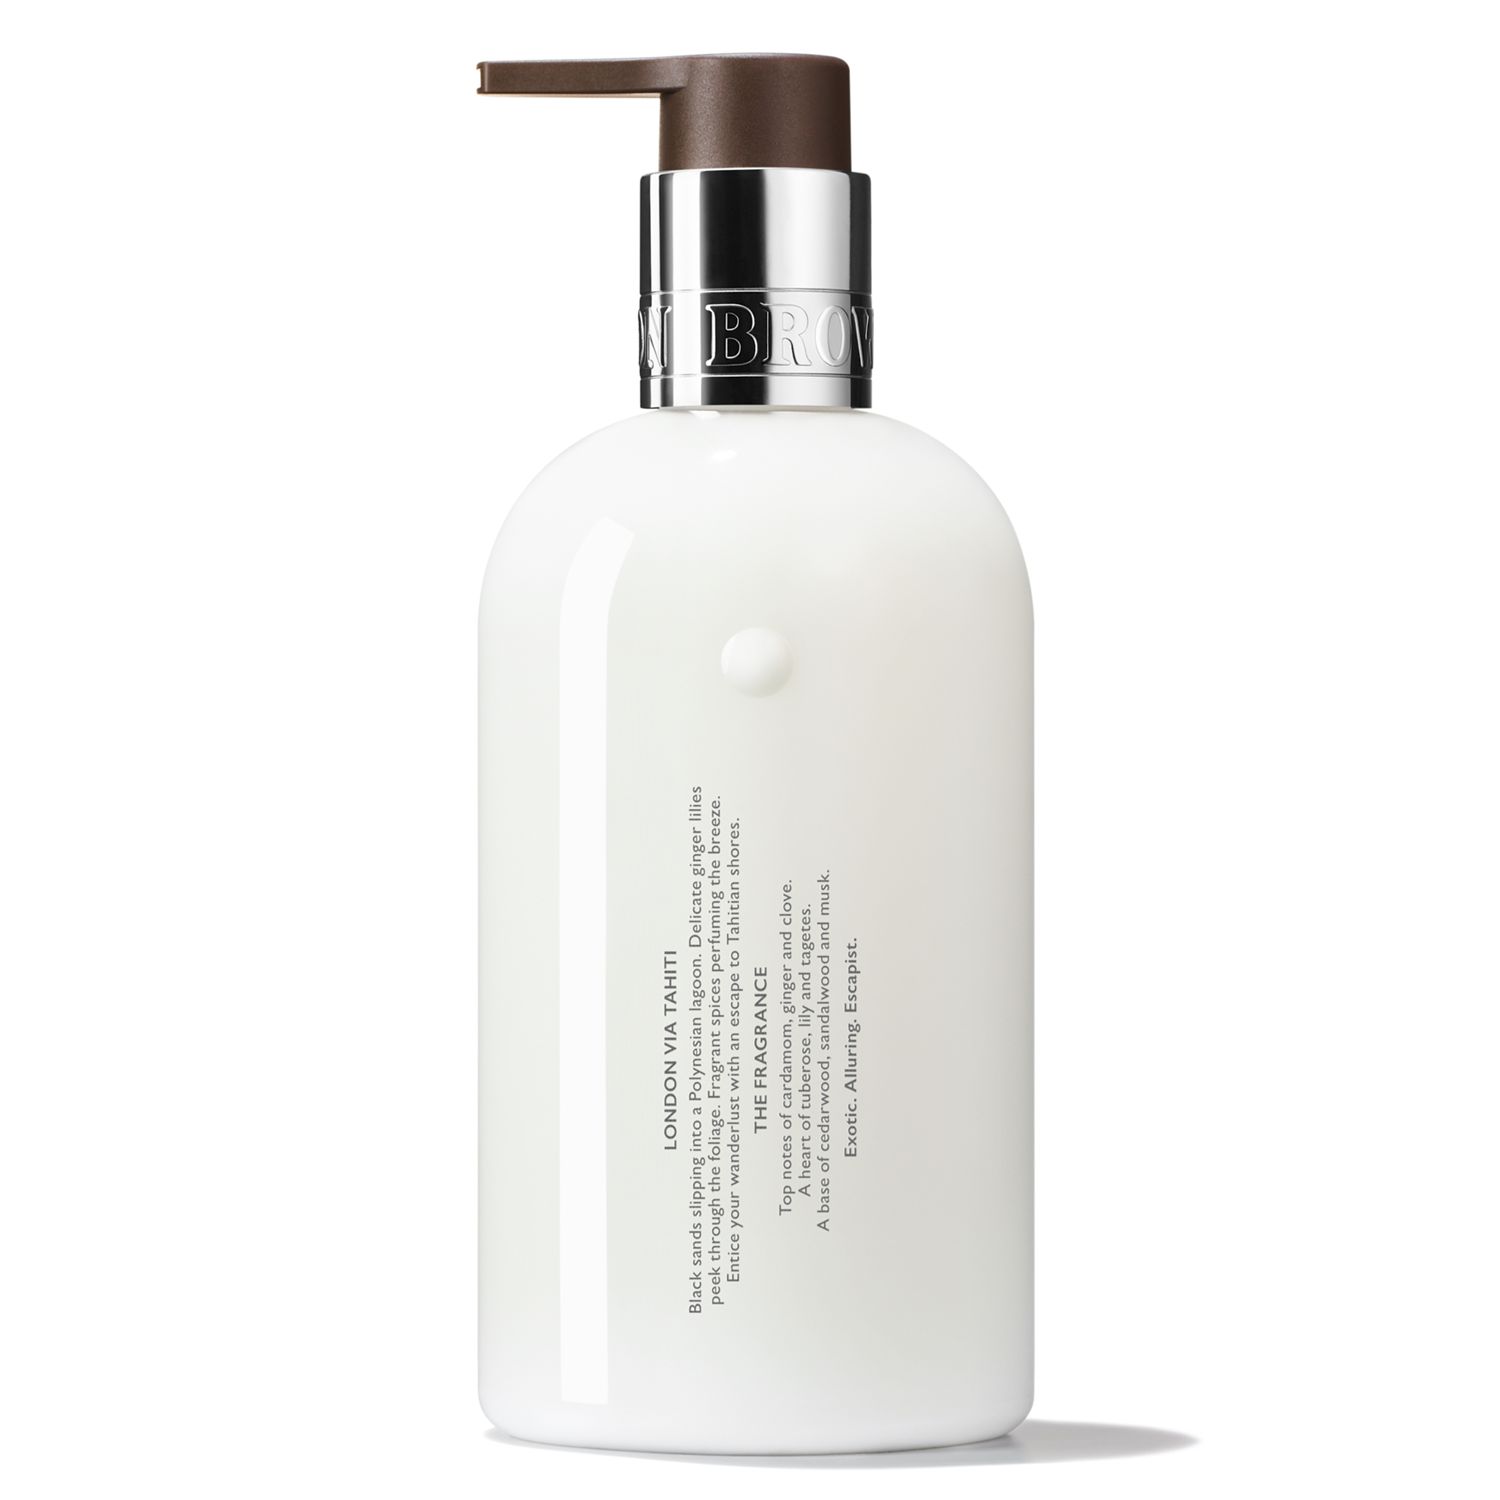 Molton Brown Heavenly Gingerlily Body Lotion, 300ml 3